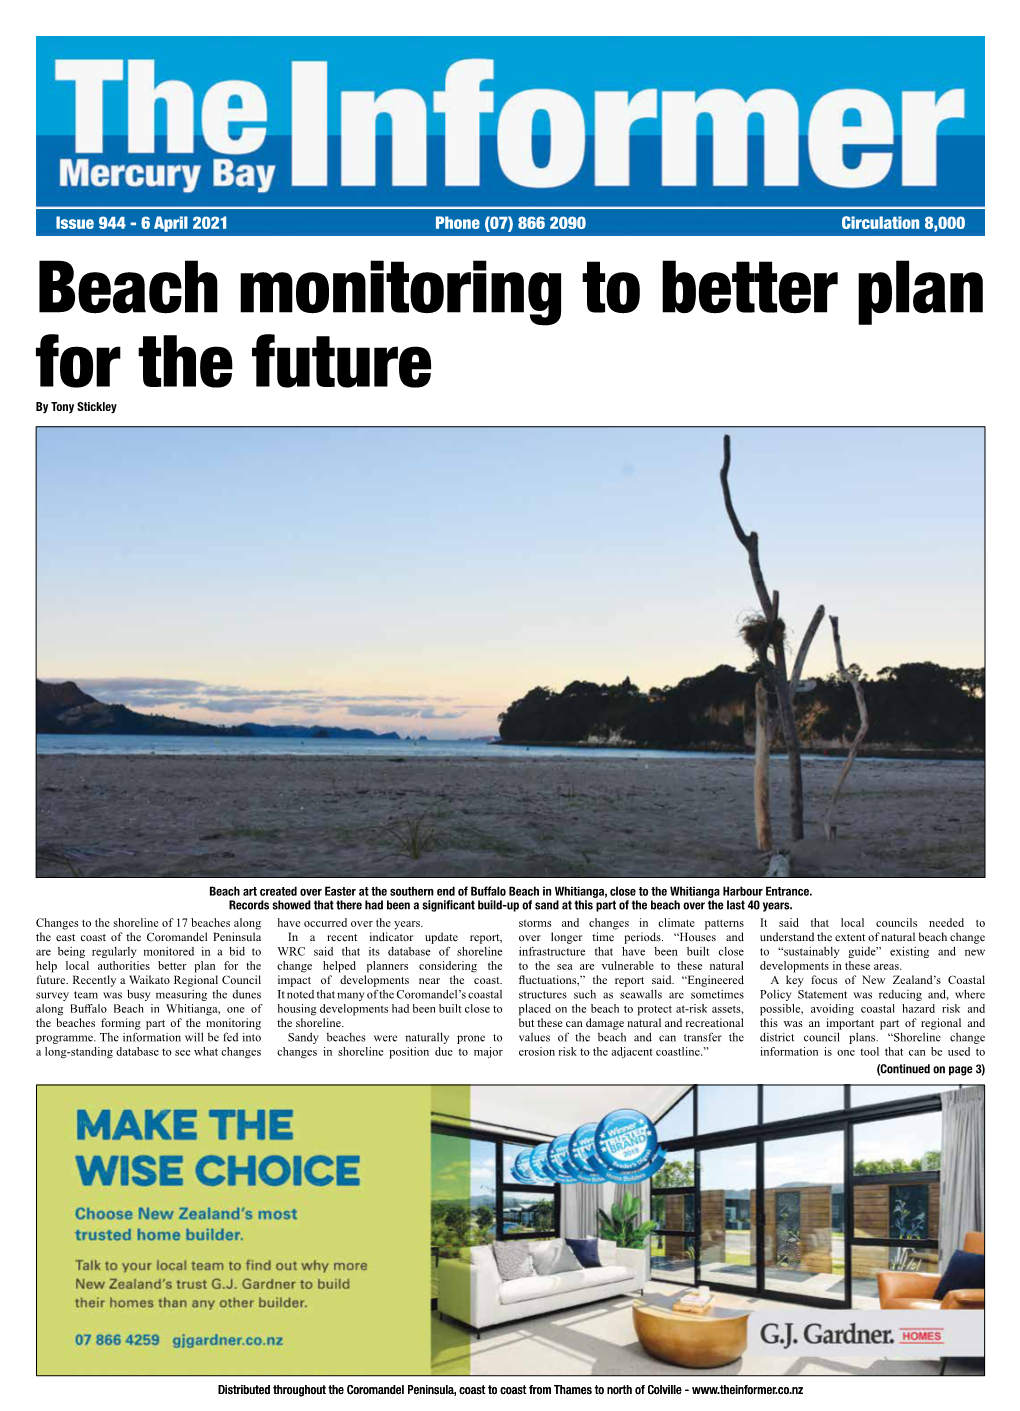 Beach Monitoring to Better Plan for the Future by Tony Stickley